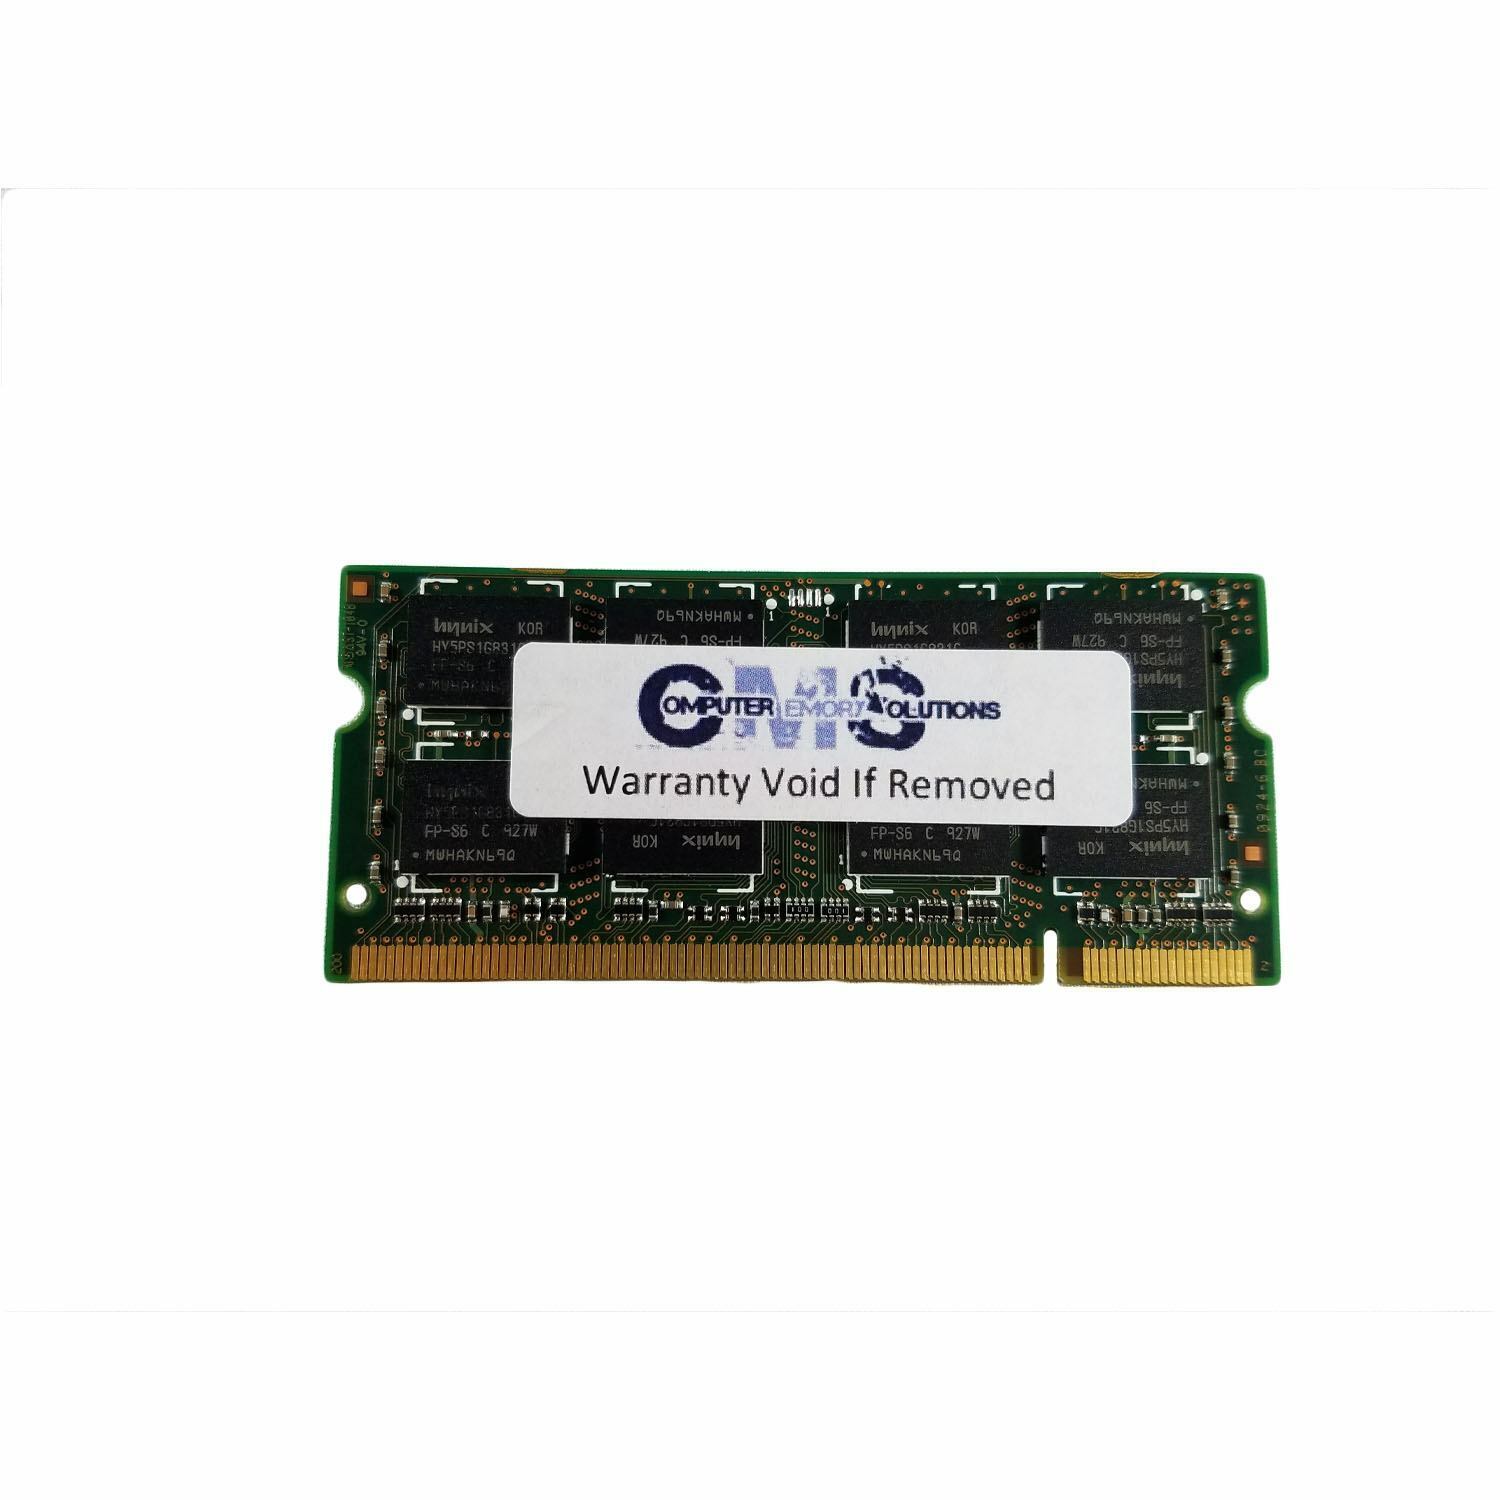 4GB (1X4GB) RAM MEMORY for HP Mobile Workstation 8510w, 8710w DDR2 5300 A43